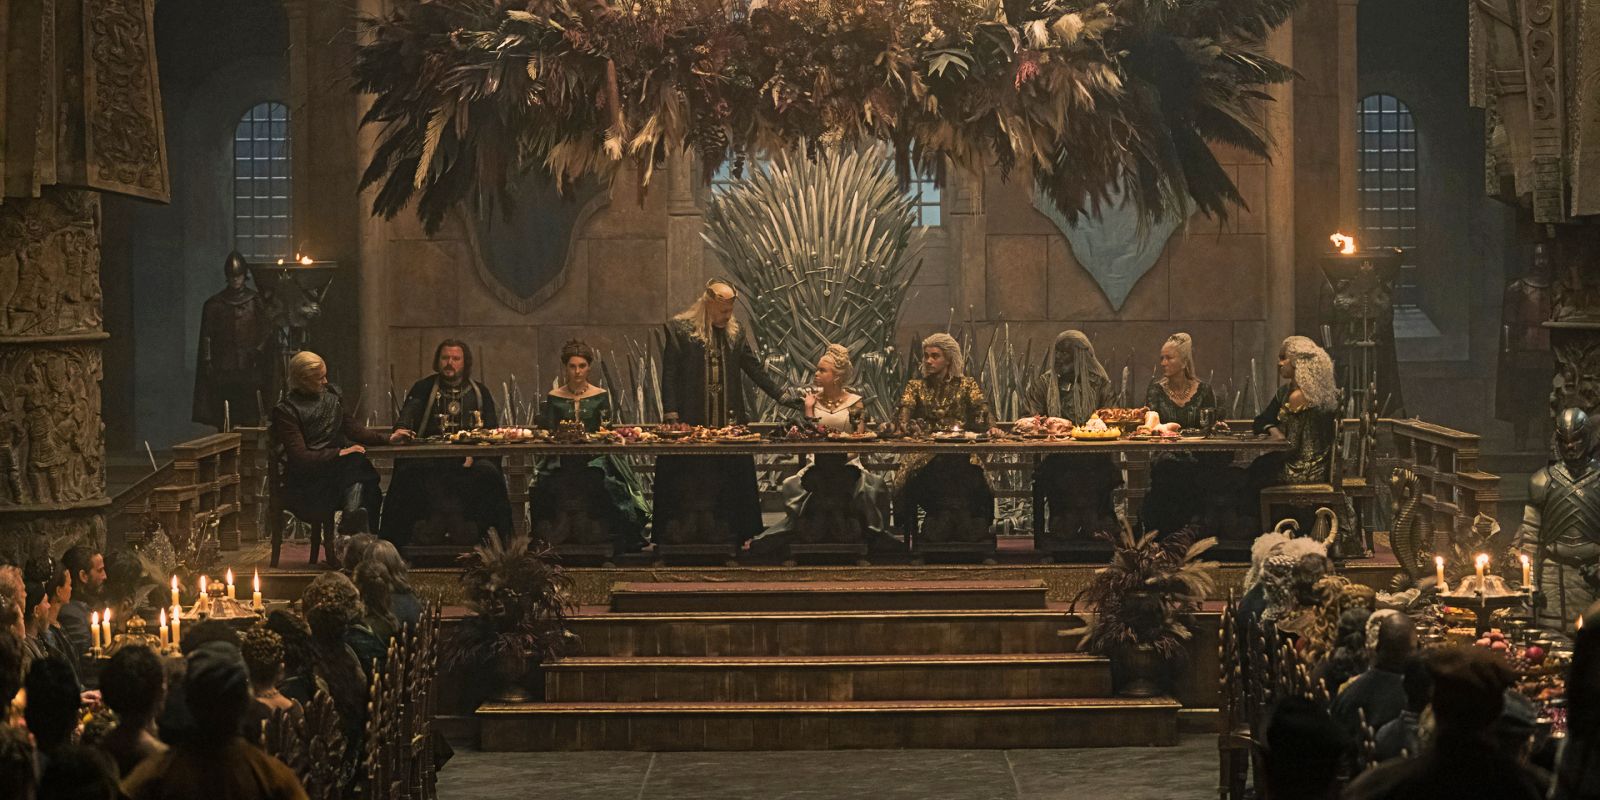 Rhaenyra and Laenor's wedding in House of the Dragon, featuring Daemon, Lyionel, Alicent, Corlys, Rhaenys, and Laena